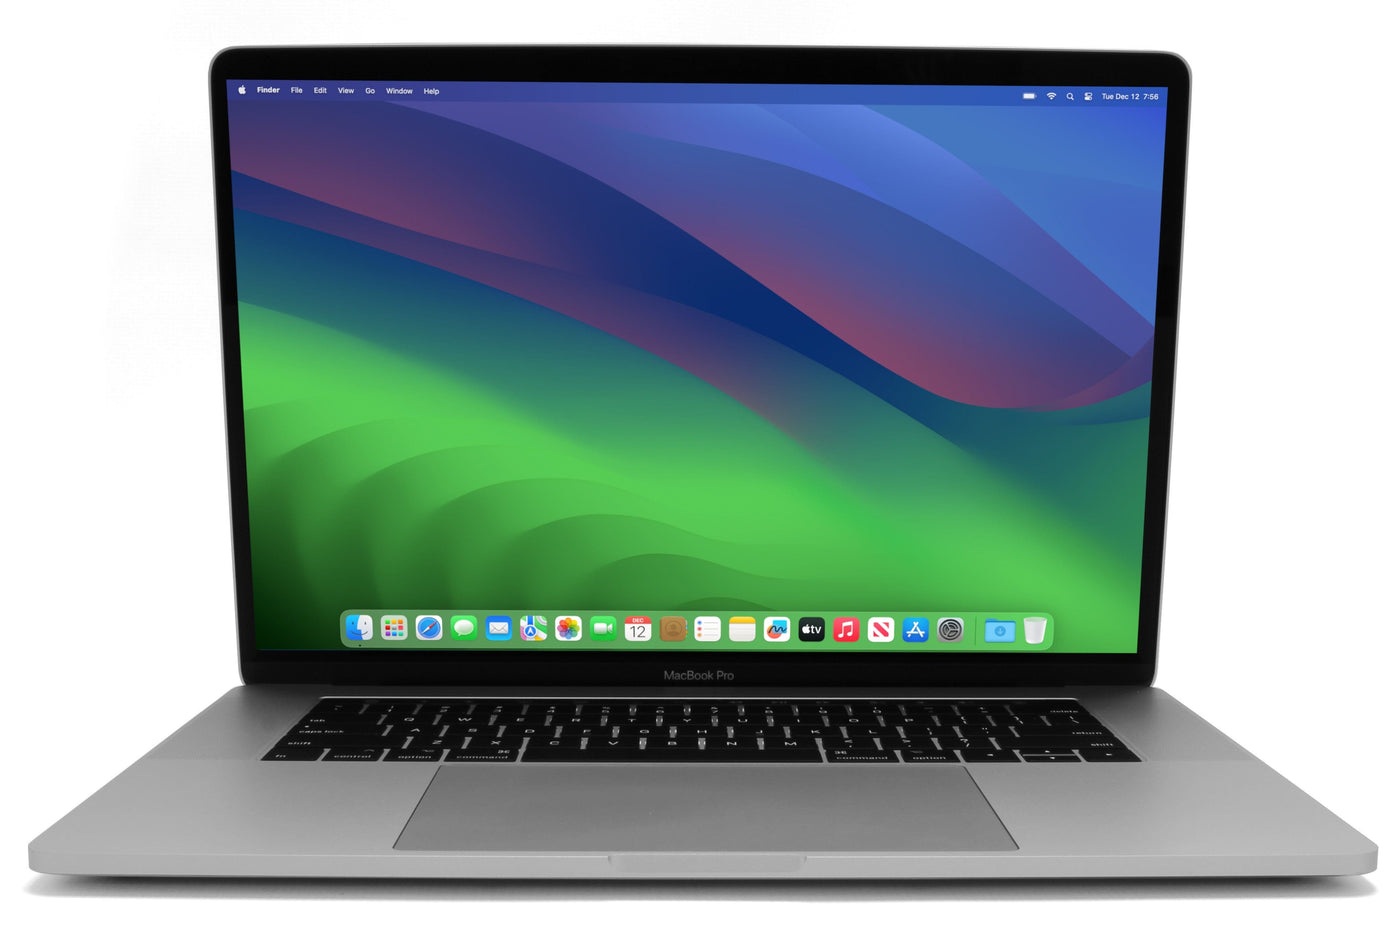 Apple MacBook Pro 15-inch MacBook Pro 15-inch Core i7 2.2GHz (Silver, Mid 2018) - Excellent